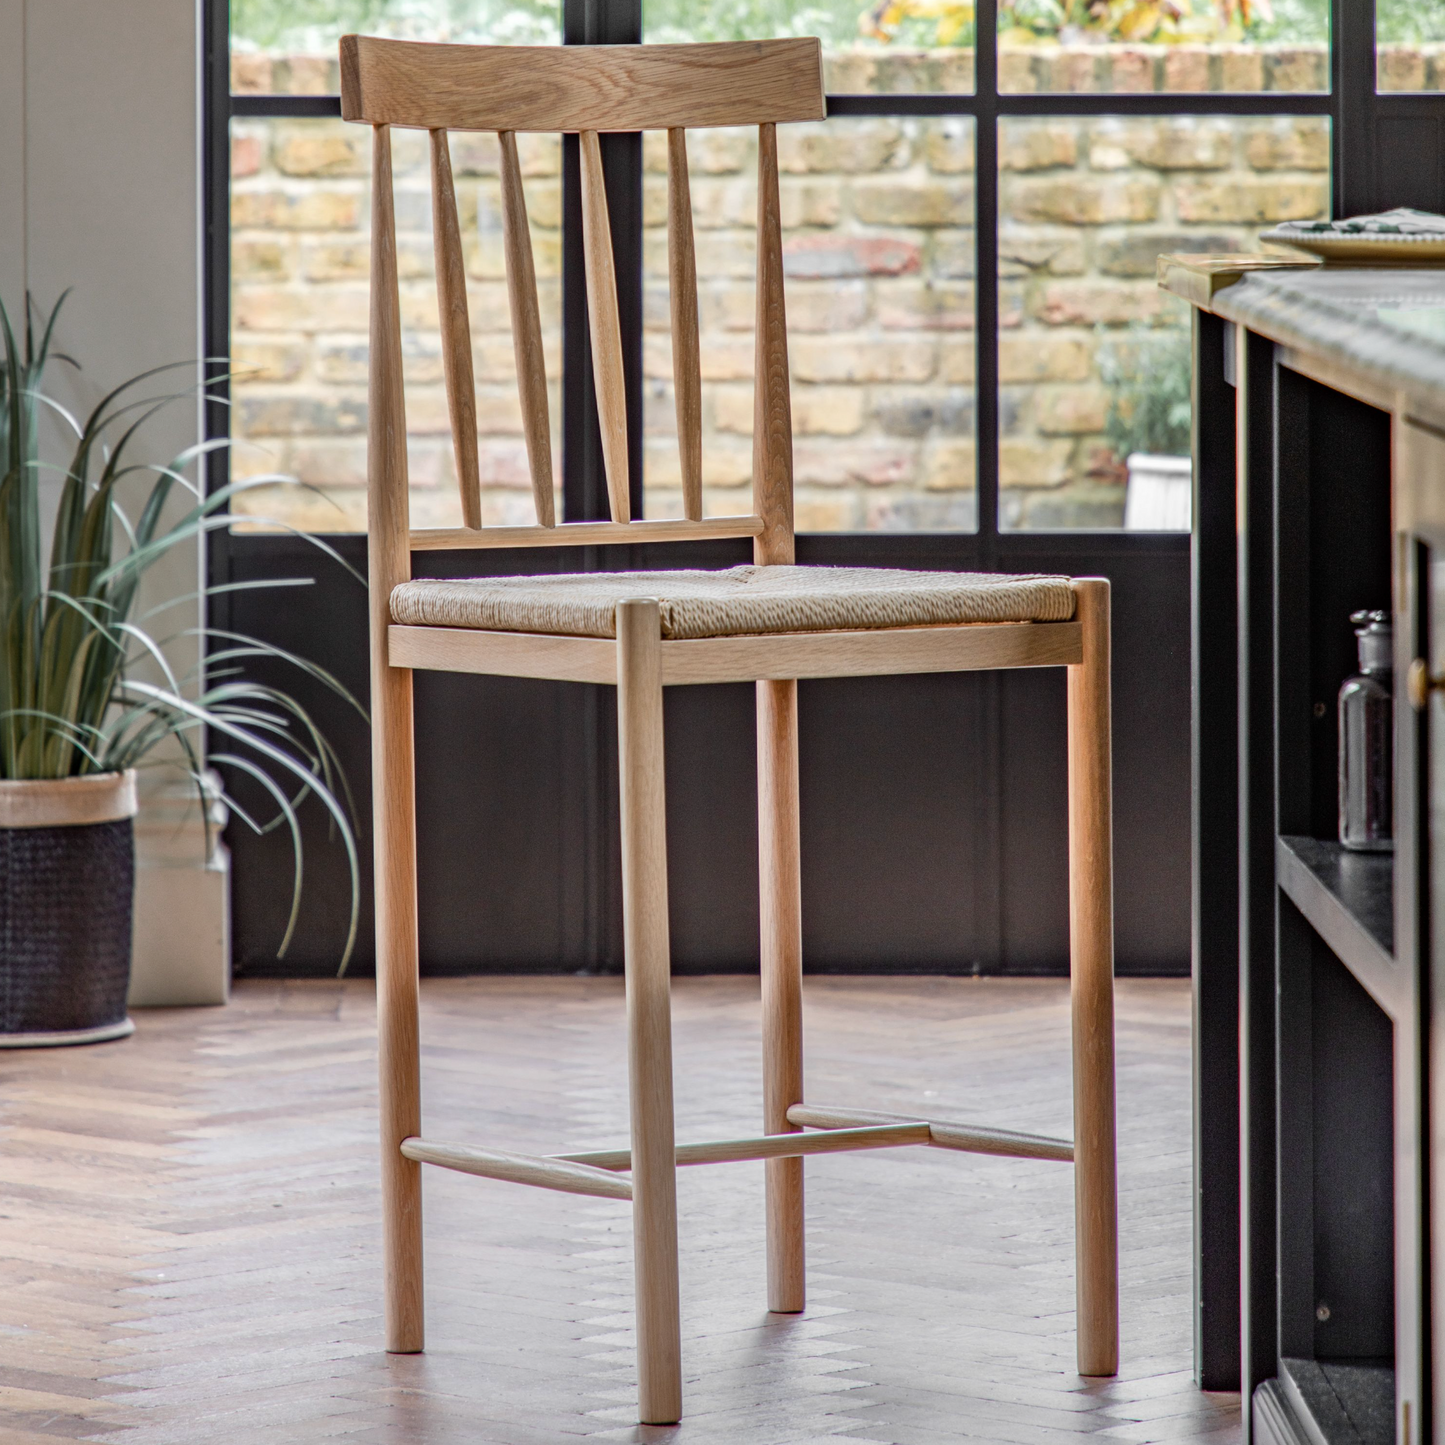 A Buckland Bar Stool in Oak 2pk from Kikiathome.co.uk, perfect for interior decor in a kitchen.